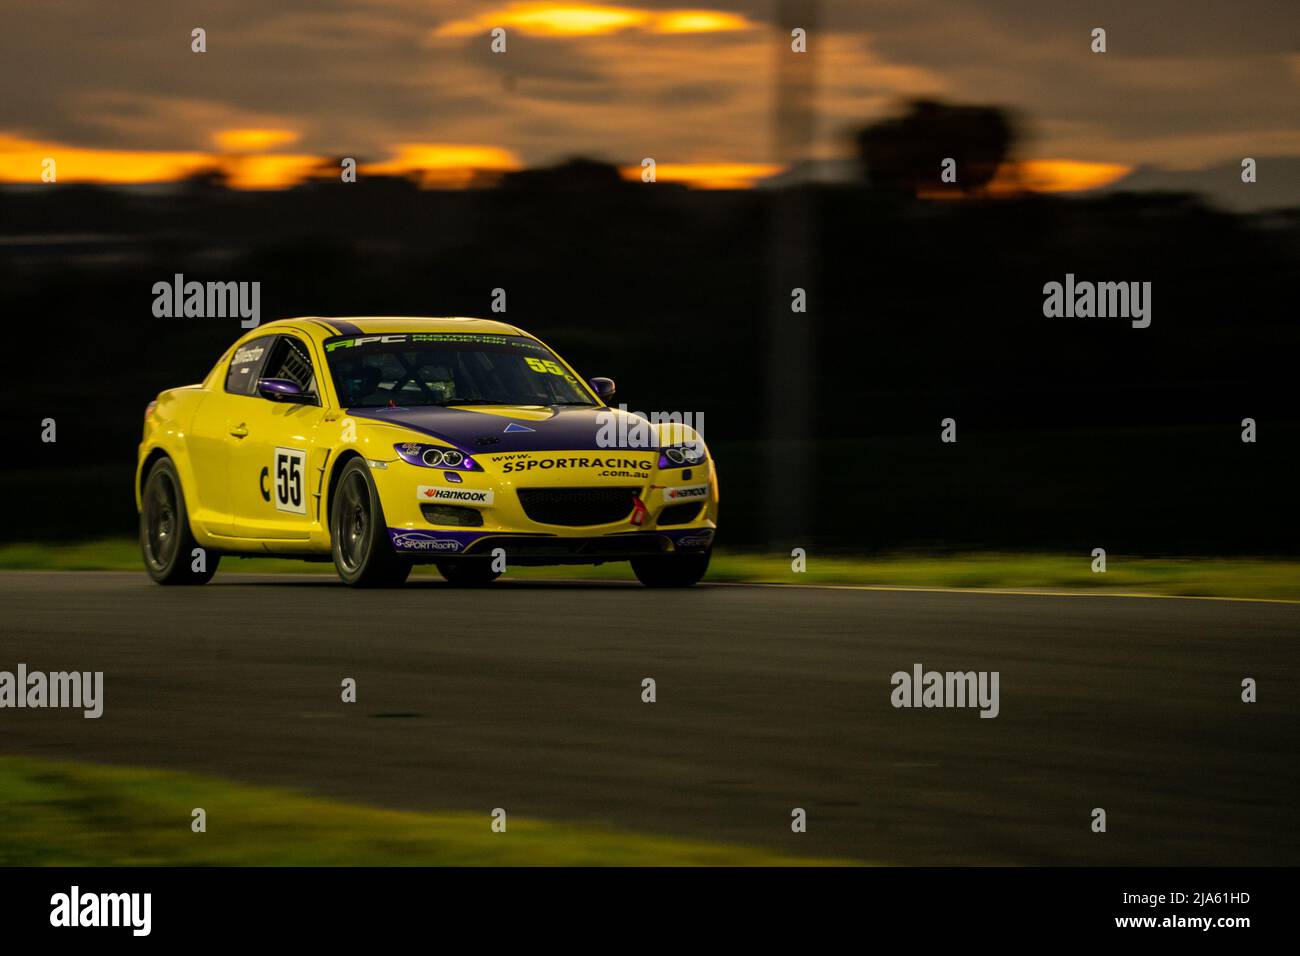 Sydney, Australia. 27 May, 2022. Sam Silvestro piloting his S-Sport Racing Mazda RX-8 through turn 3 at Sydney Motorsport Park as the sun sets. Credit: James Forrester / Alamy Live News. Stock Photo